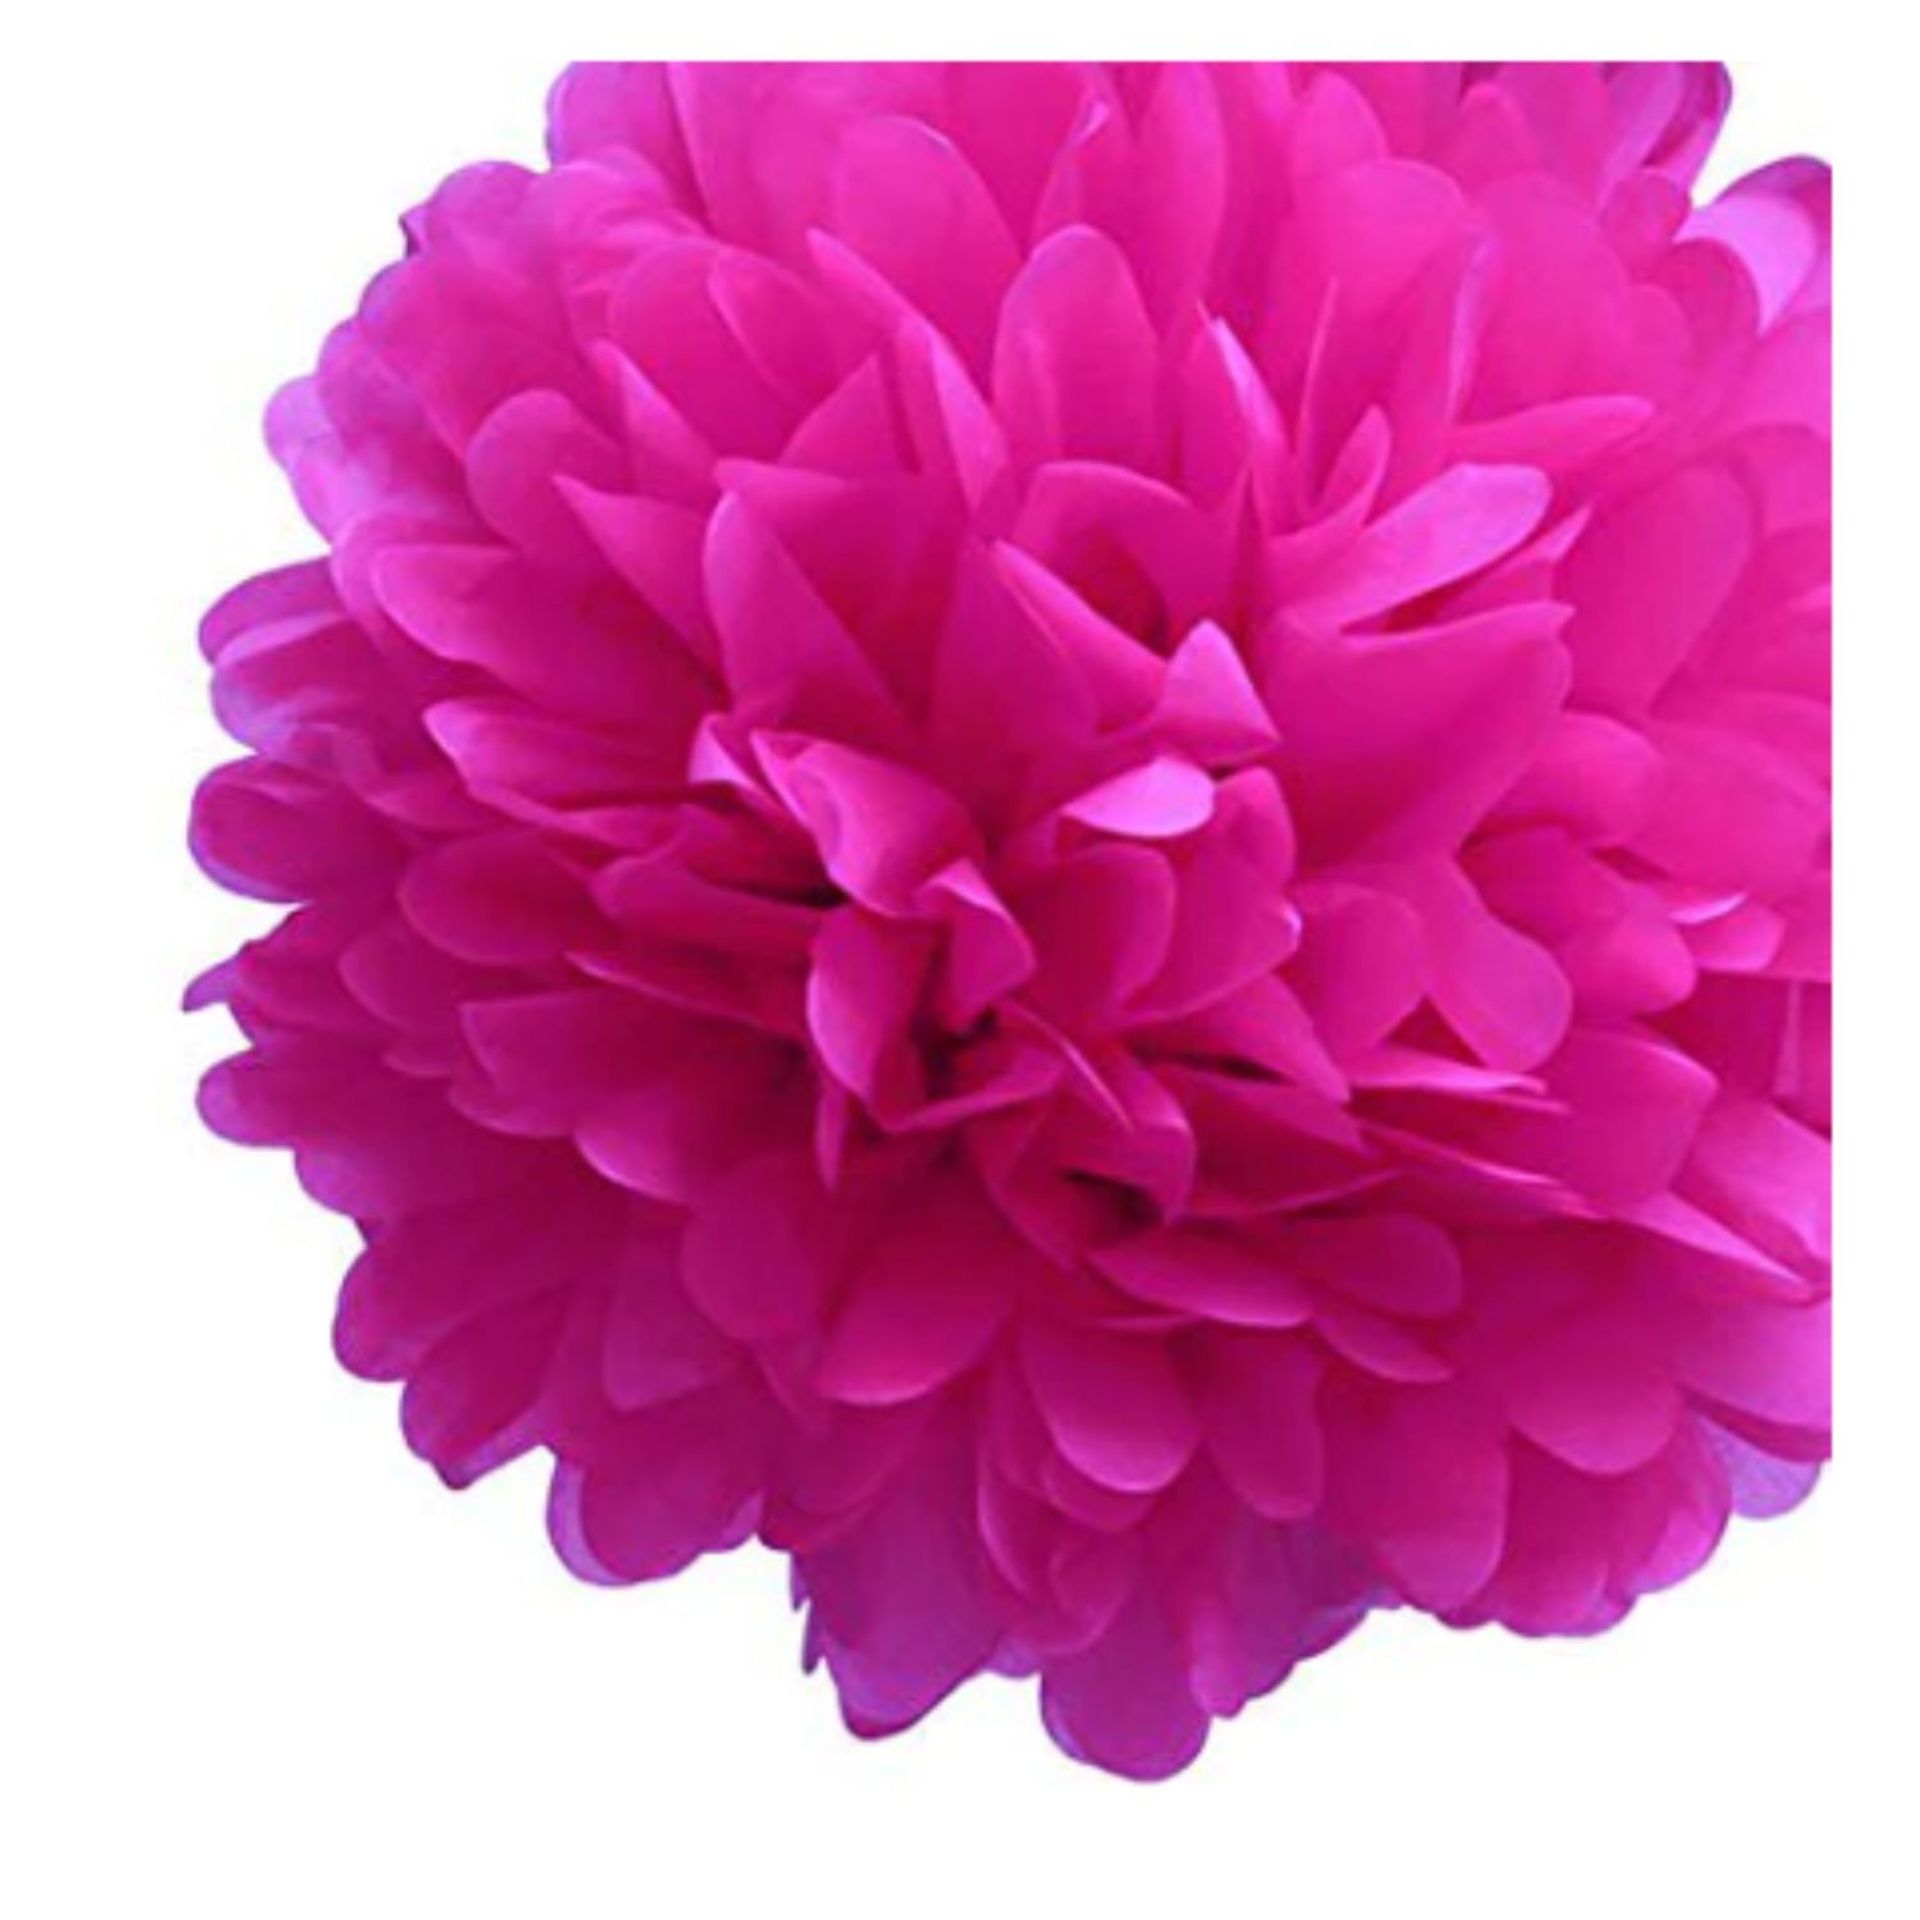 1000 PARTY SUPPLIES 12" FLUTTER TISSUE PAPER BALL - RANGE OF COLOURS, RRP £10,000 - Image 5 of 9